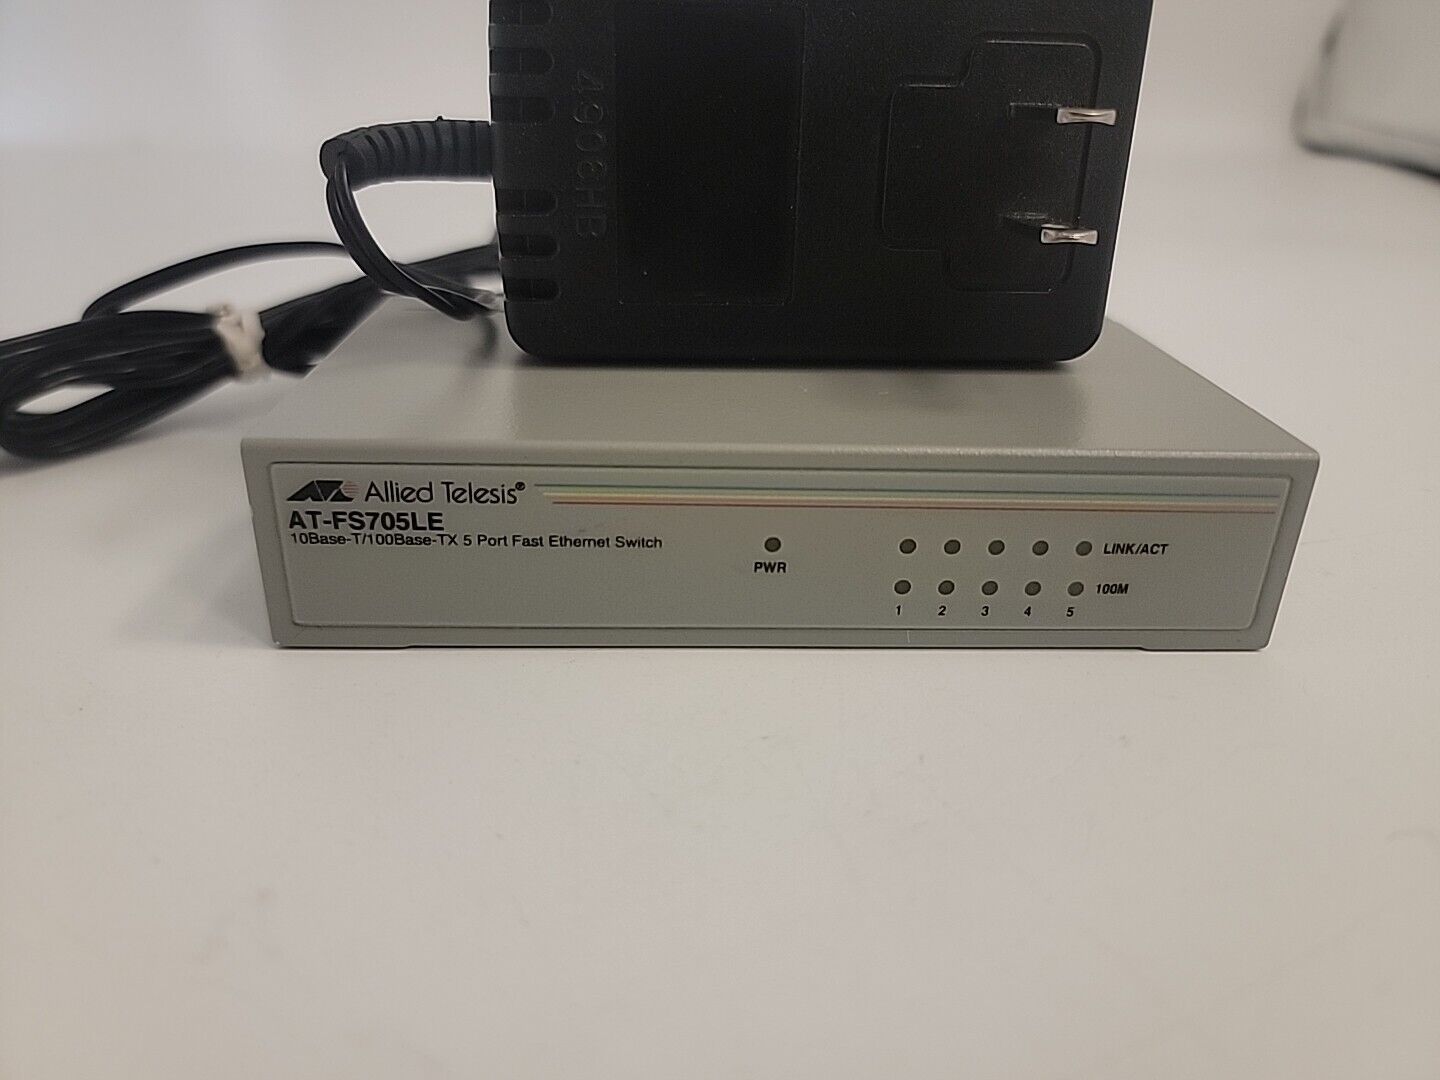 Used Allied Telesyn 5-port AT-FS705LE Ethernet Switch